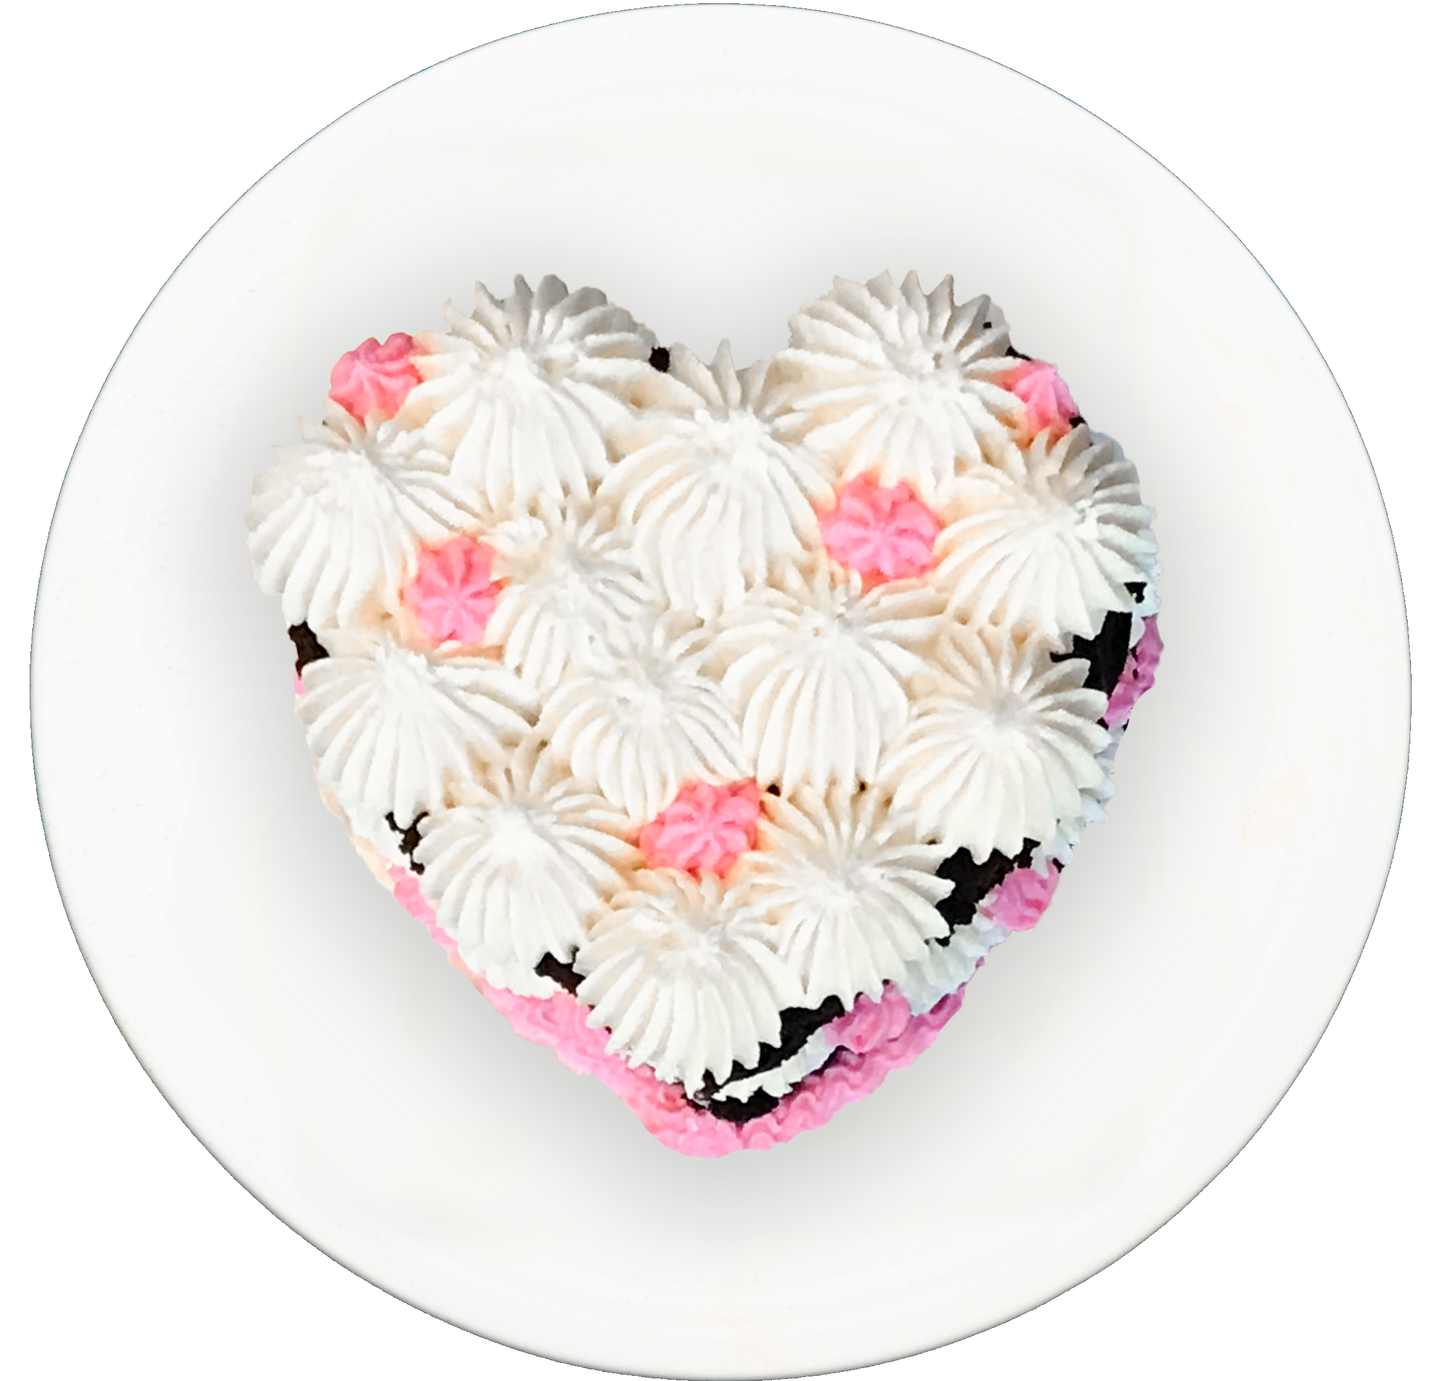 Valentine's Day Cakes from Thistle's Summit